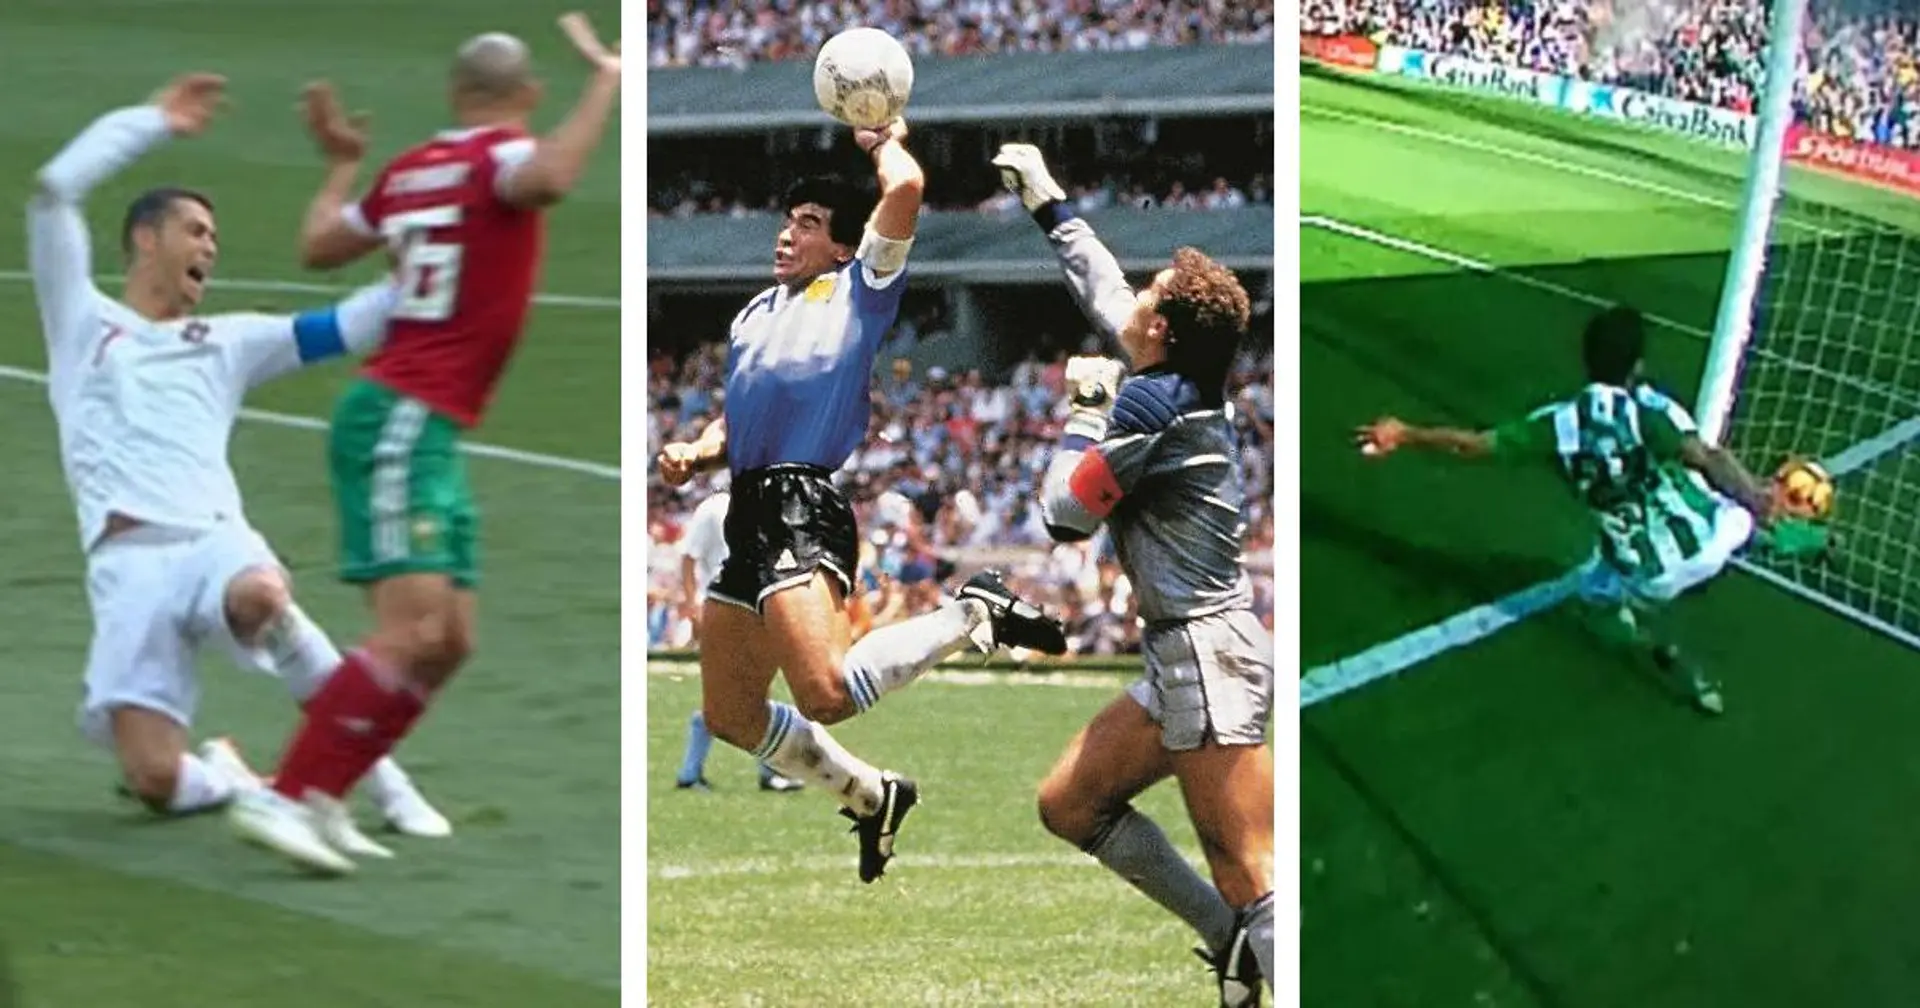 The hand of God, 100% goals not awarded and 9 more worst acts of cheating in football